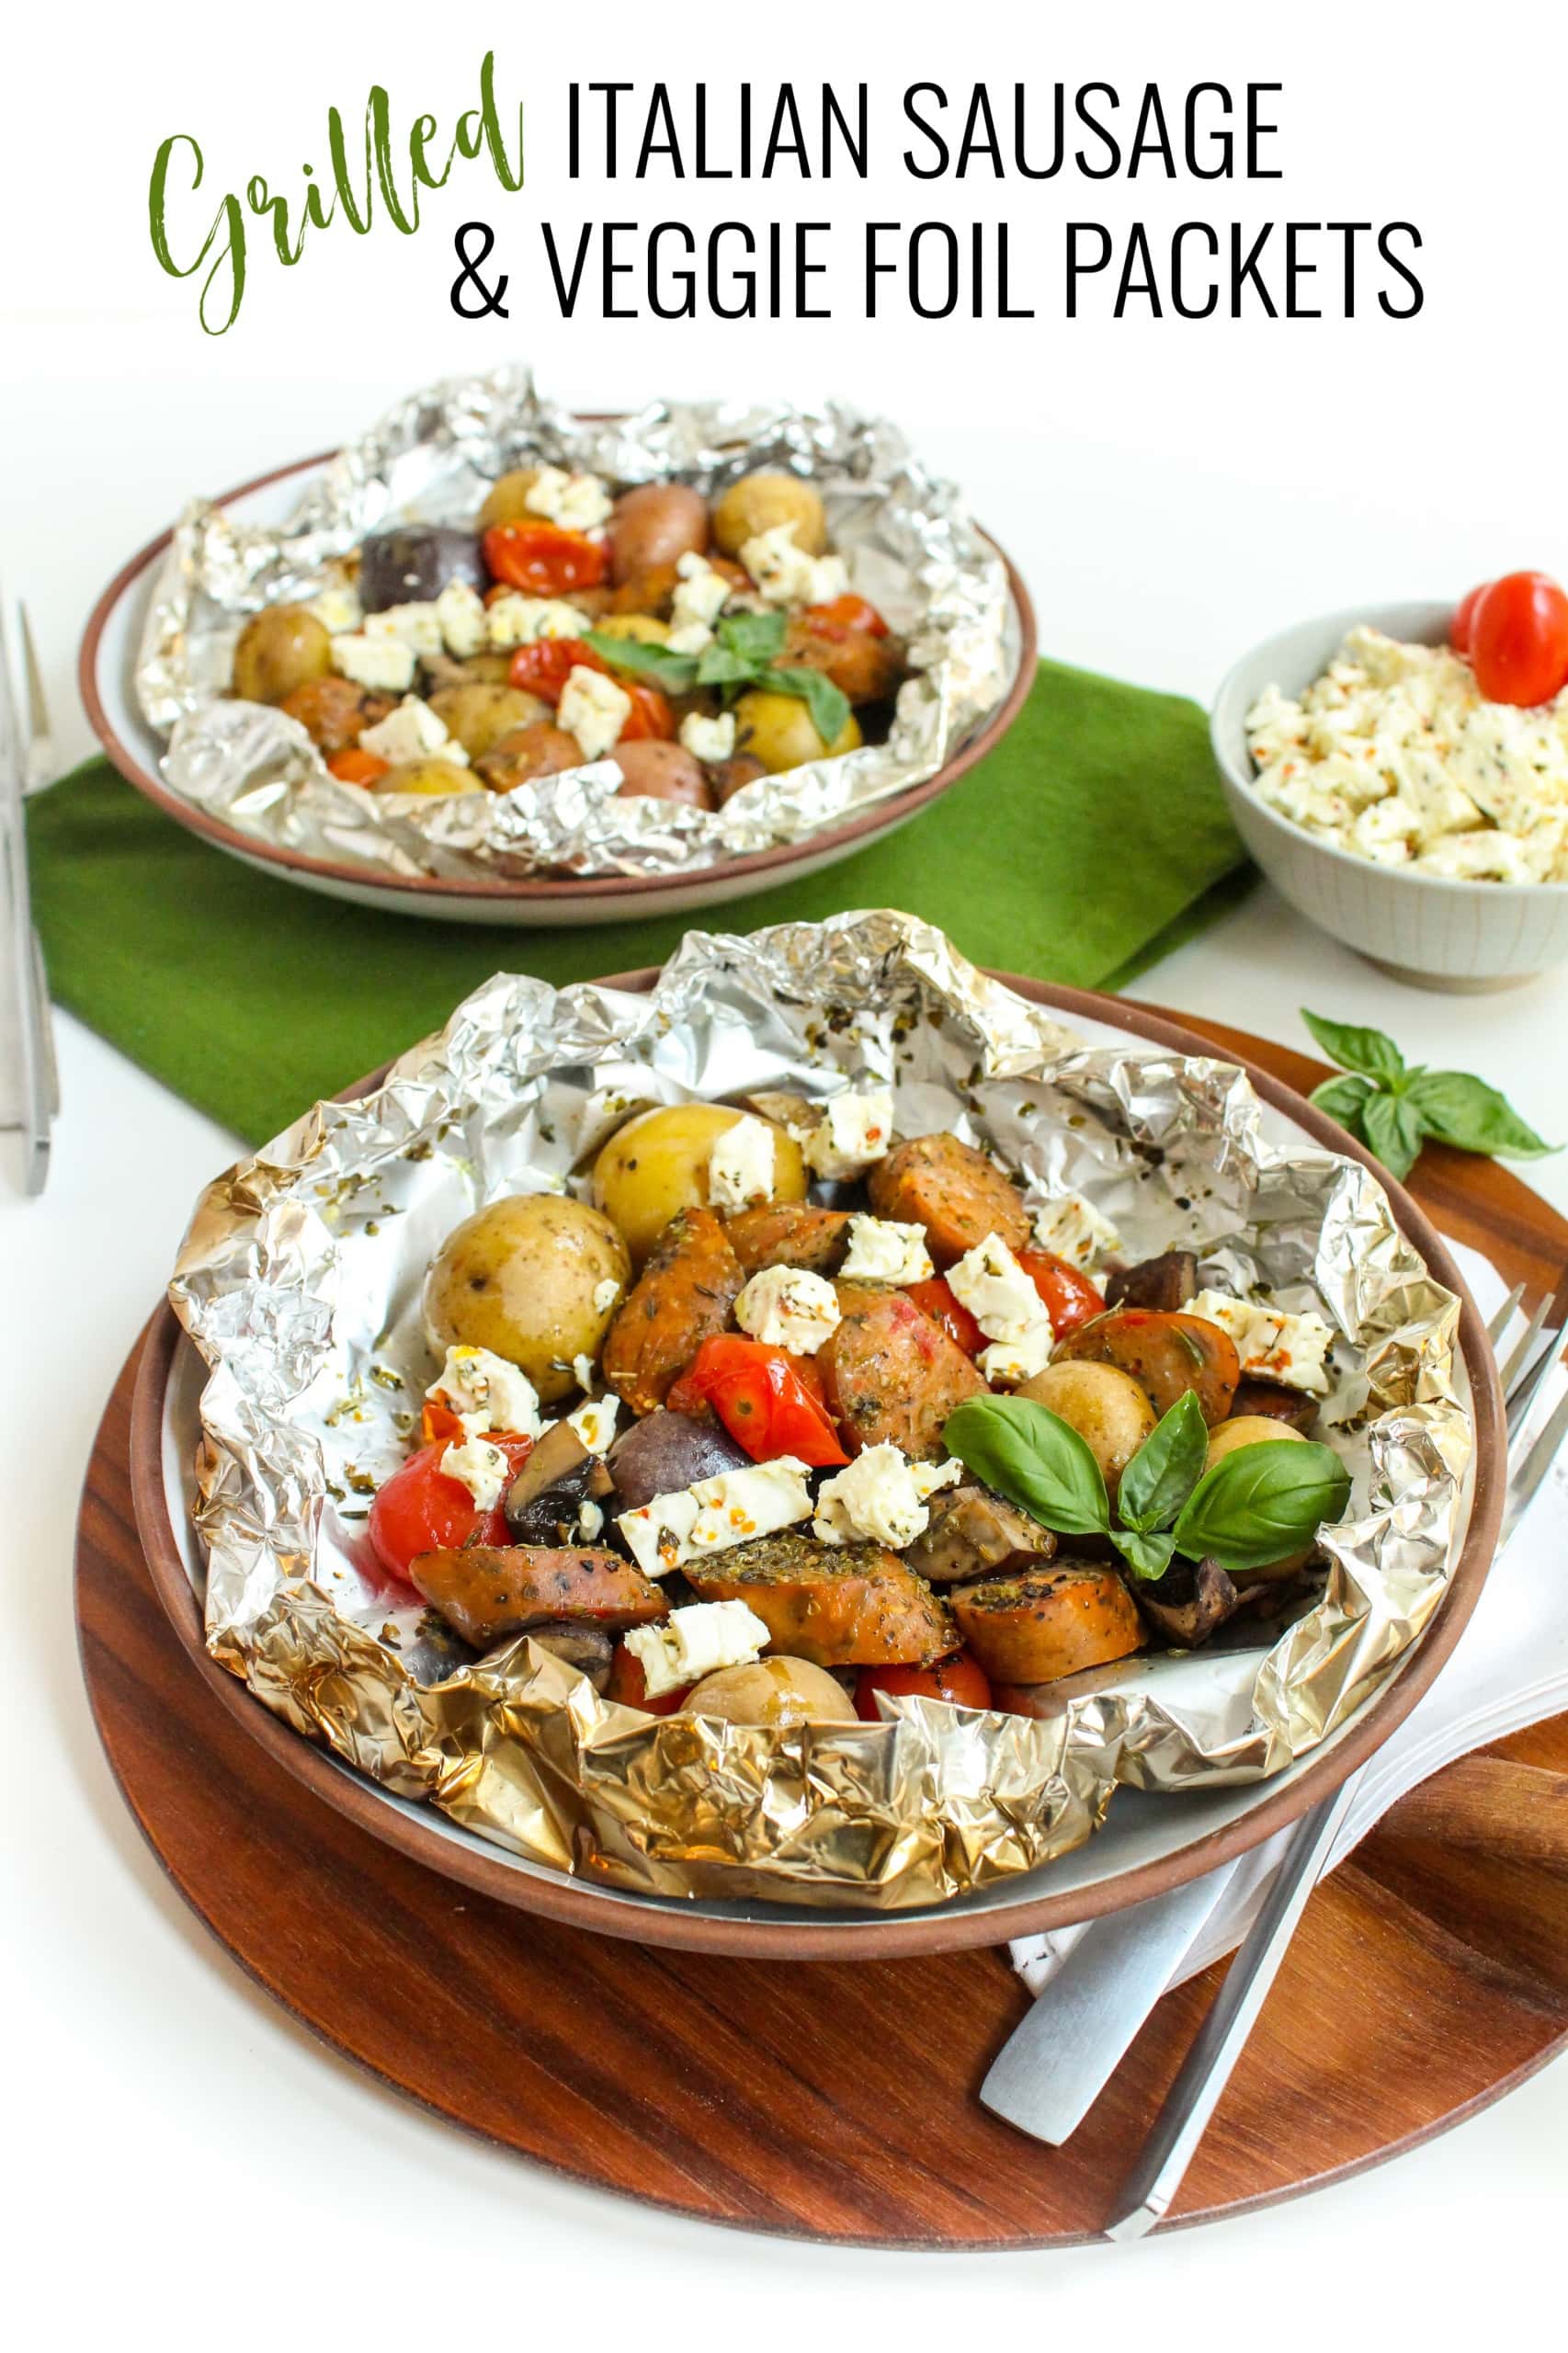 Grilled Italian Sausage & Veggie Foil Packets - Healthy Dinner Recipe